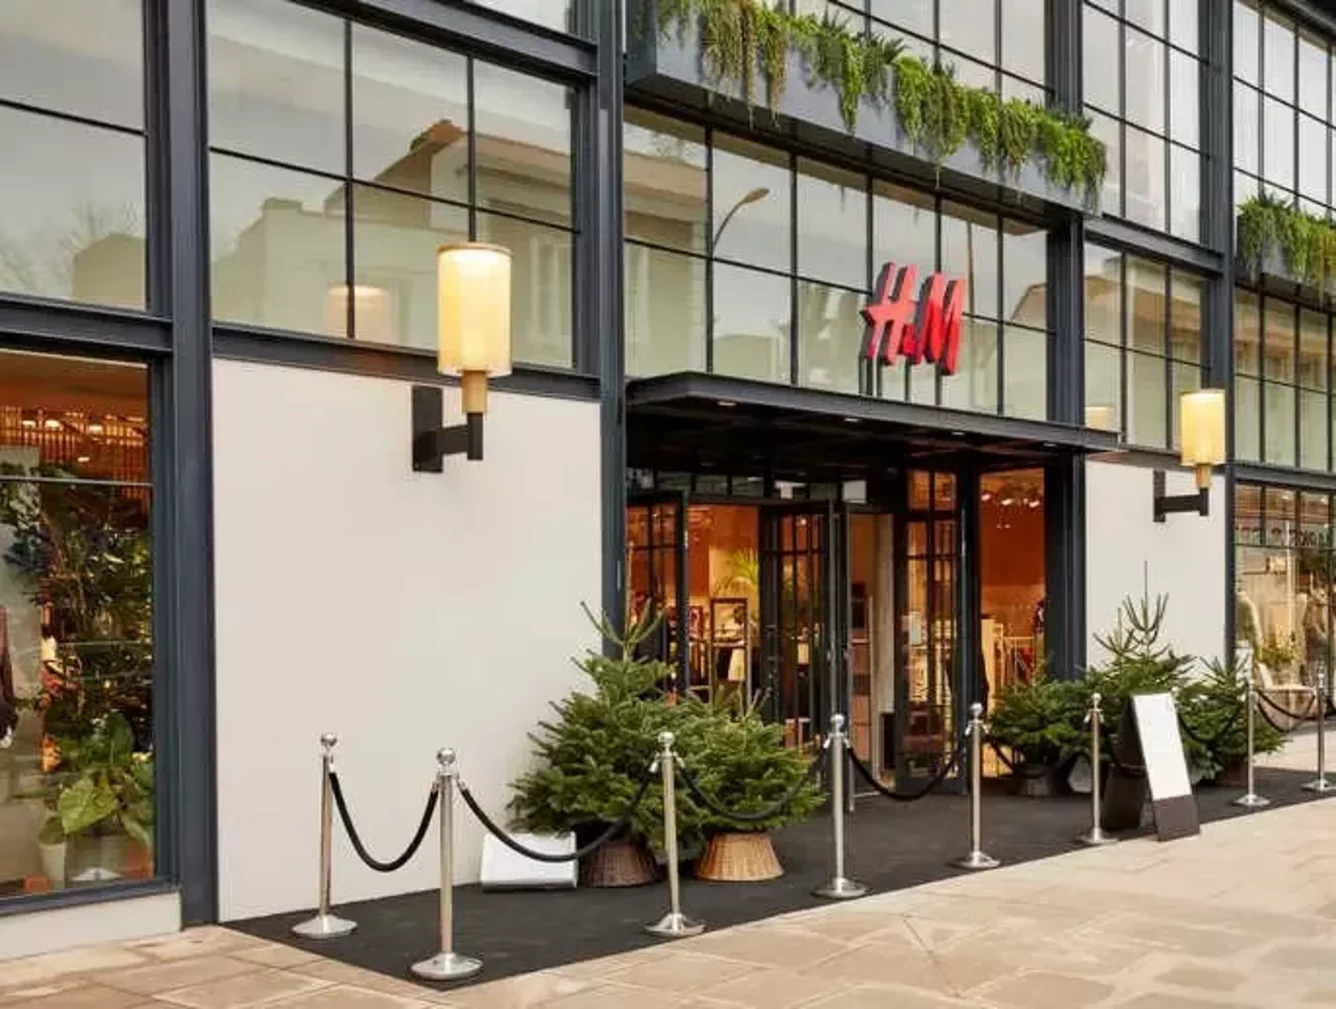 H&M Wraps Up a Year of Store Tests and Digital Developments